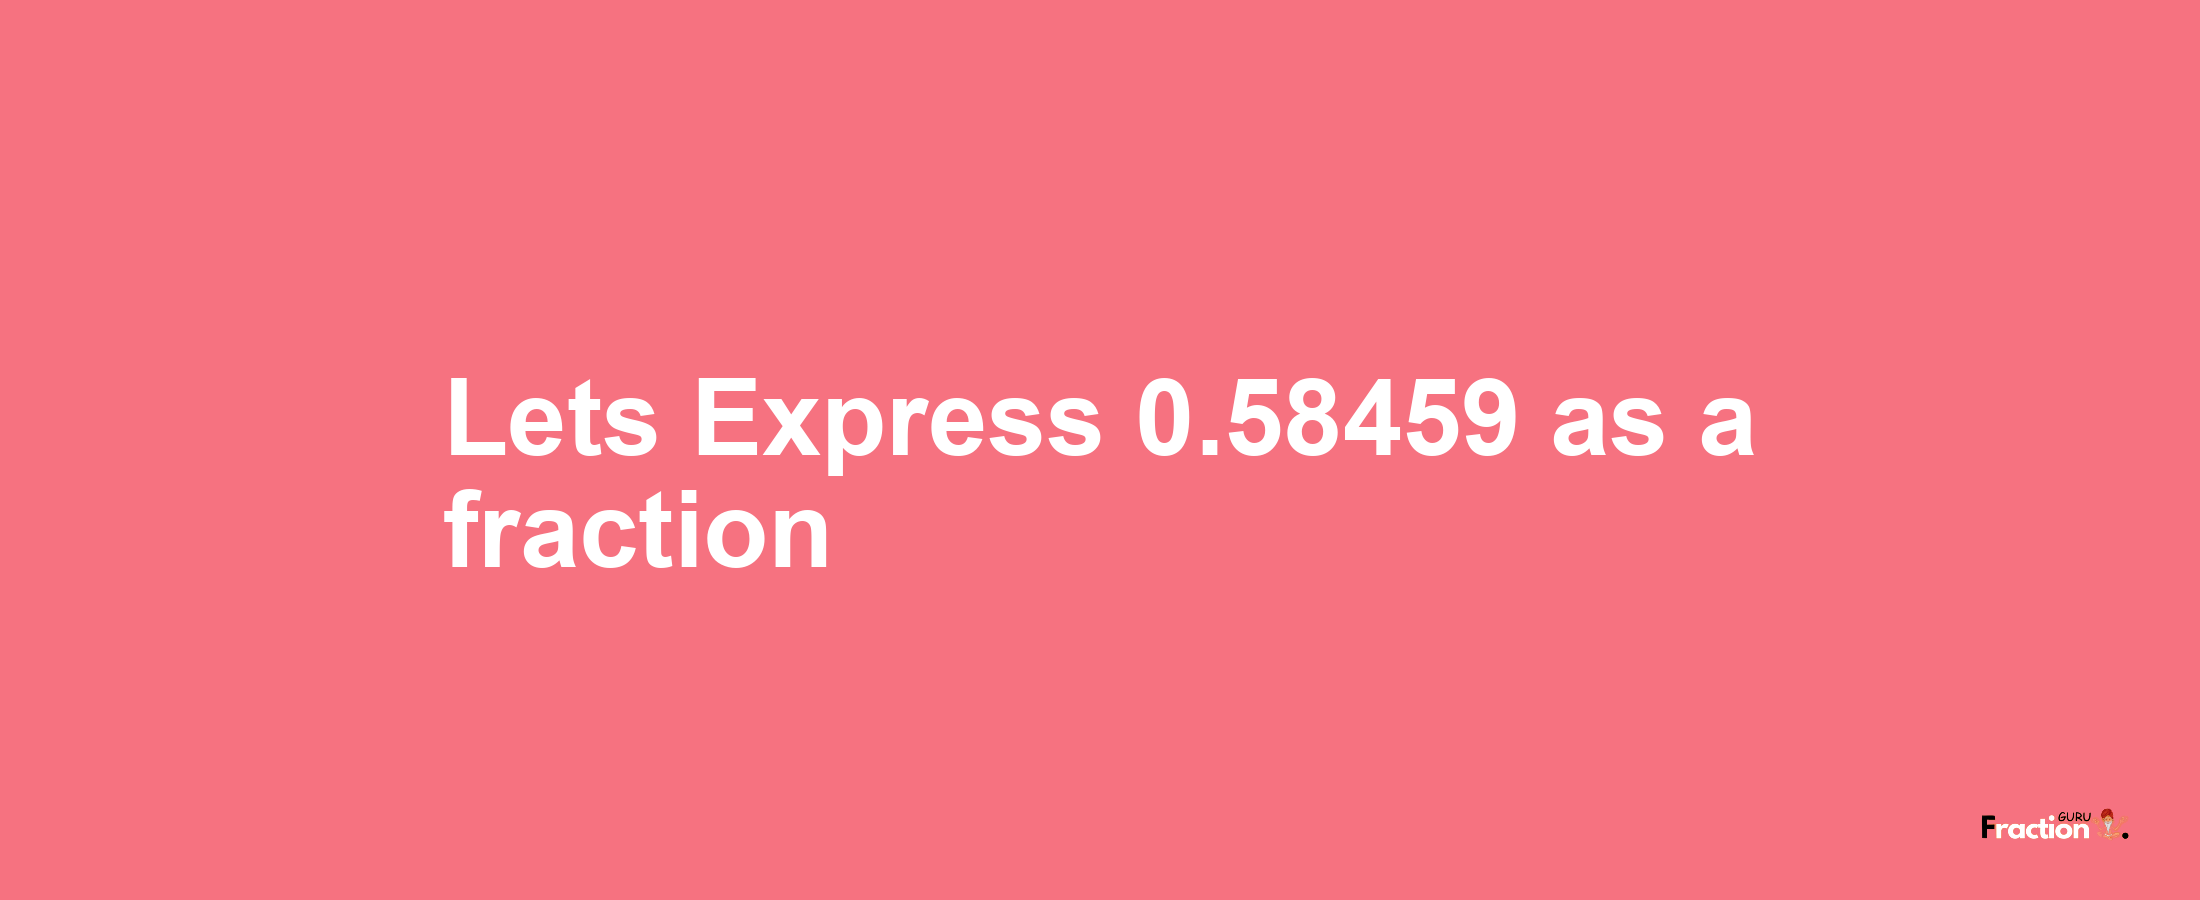 Lets Express 0.58459 as afraction